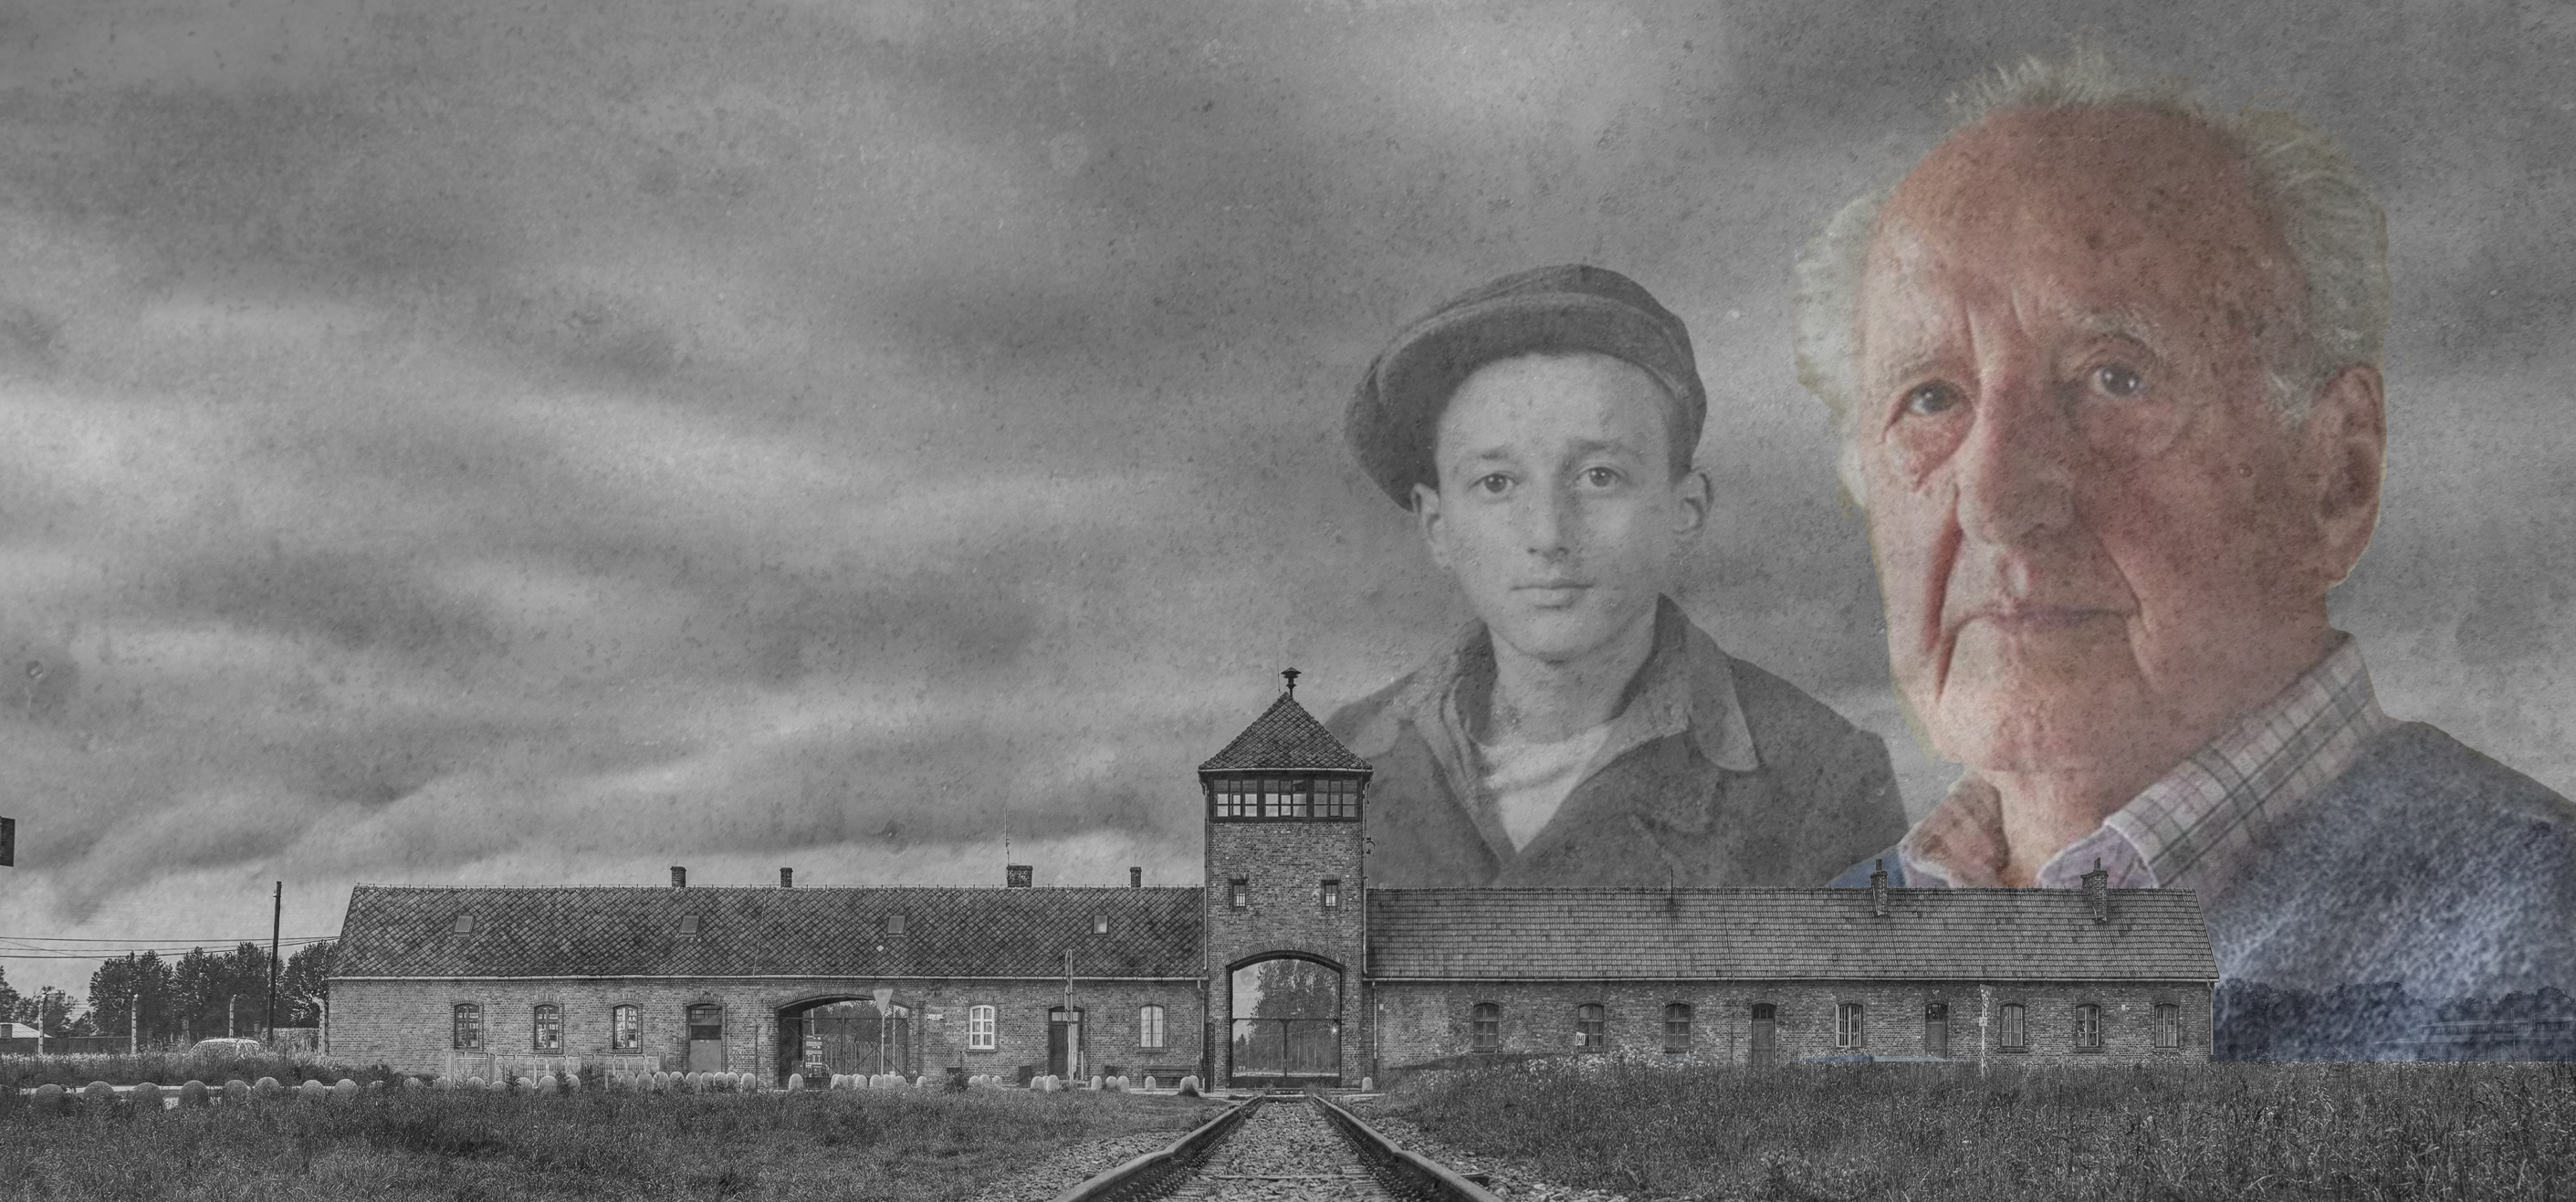 An image showing Ivor Perl BEM as both a child and an old man set against a backdrop of Auschwitz. 